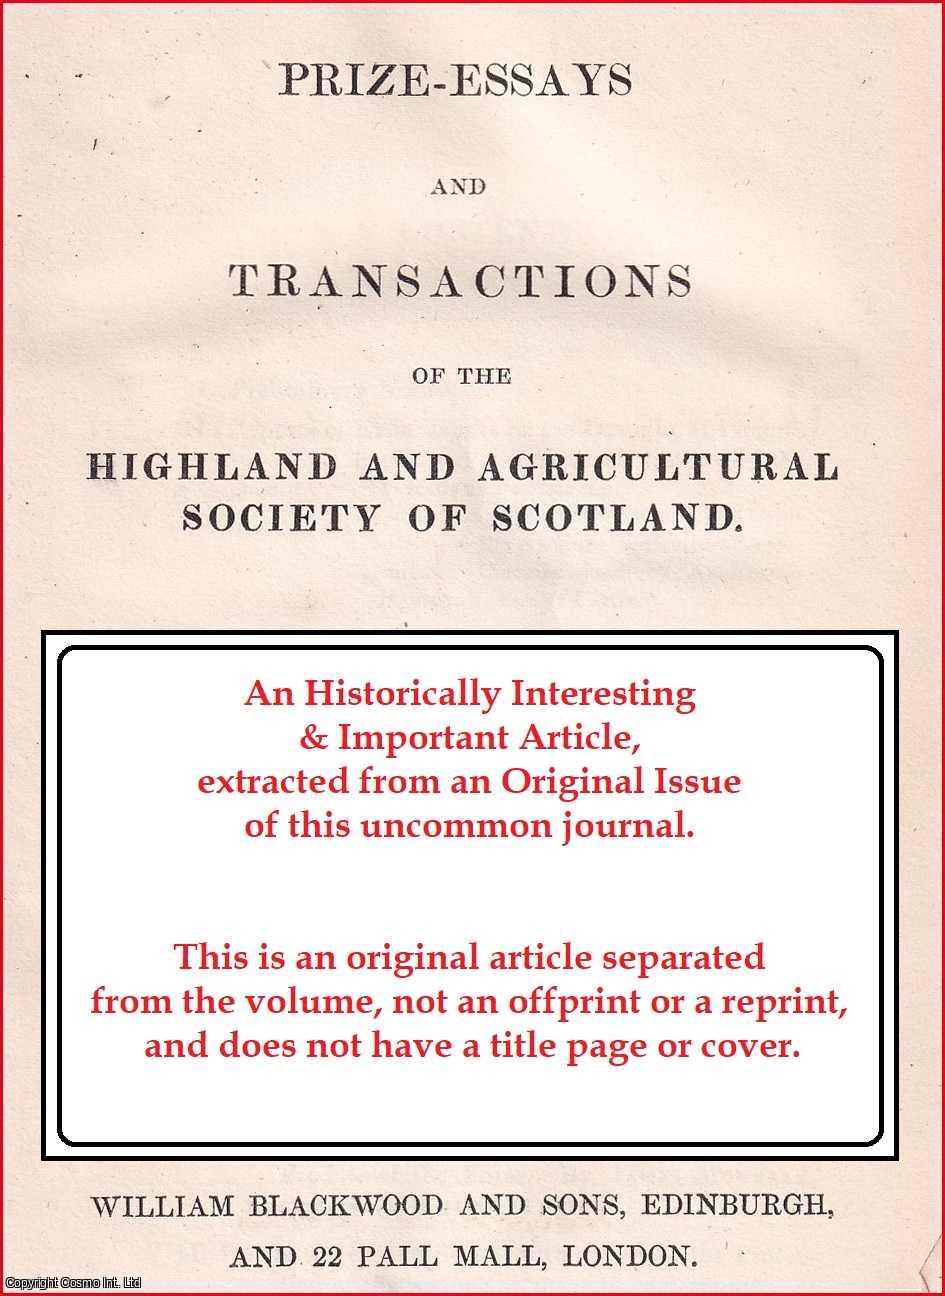 Mr. David Wilson, Walston Manse - The Present State of the Upper Ward of Lanarkshire. An uncommon original article from the Prize Essays and Transactions of the Highland Society of Scotland, 1837.